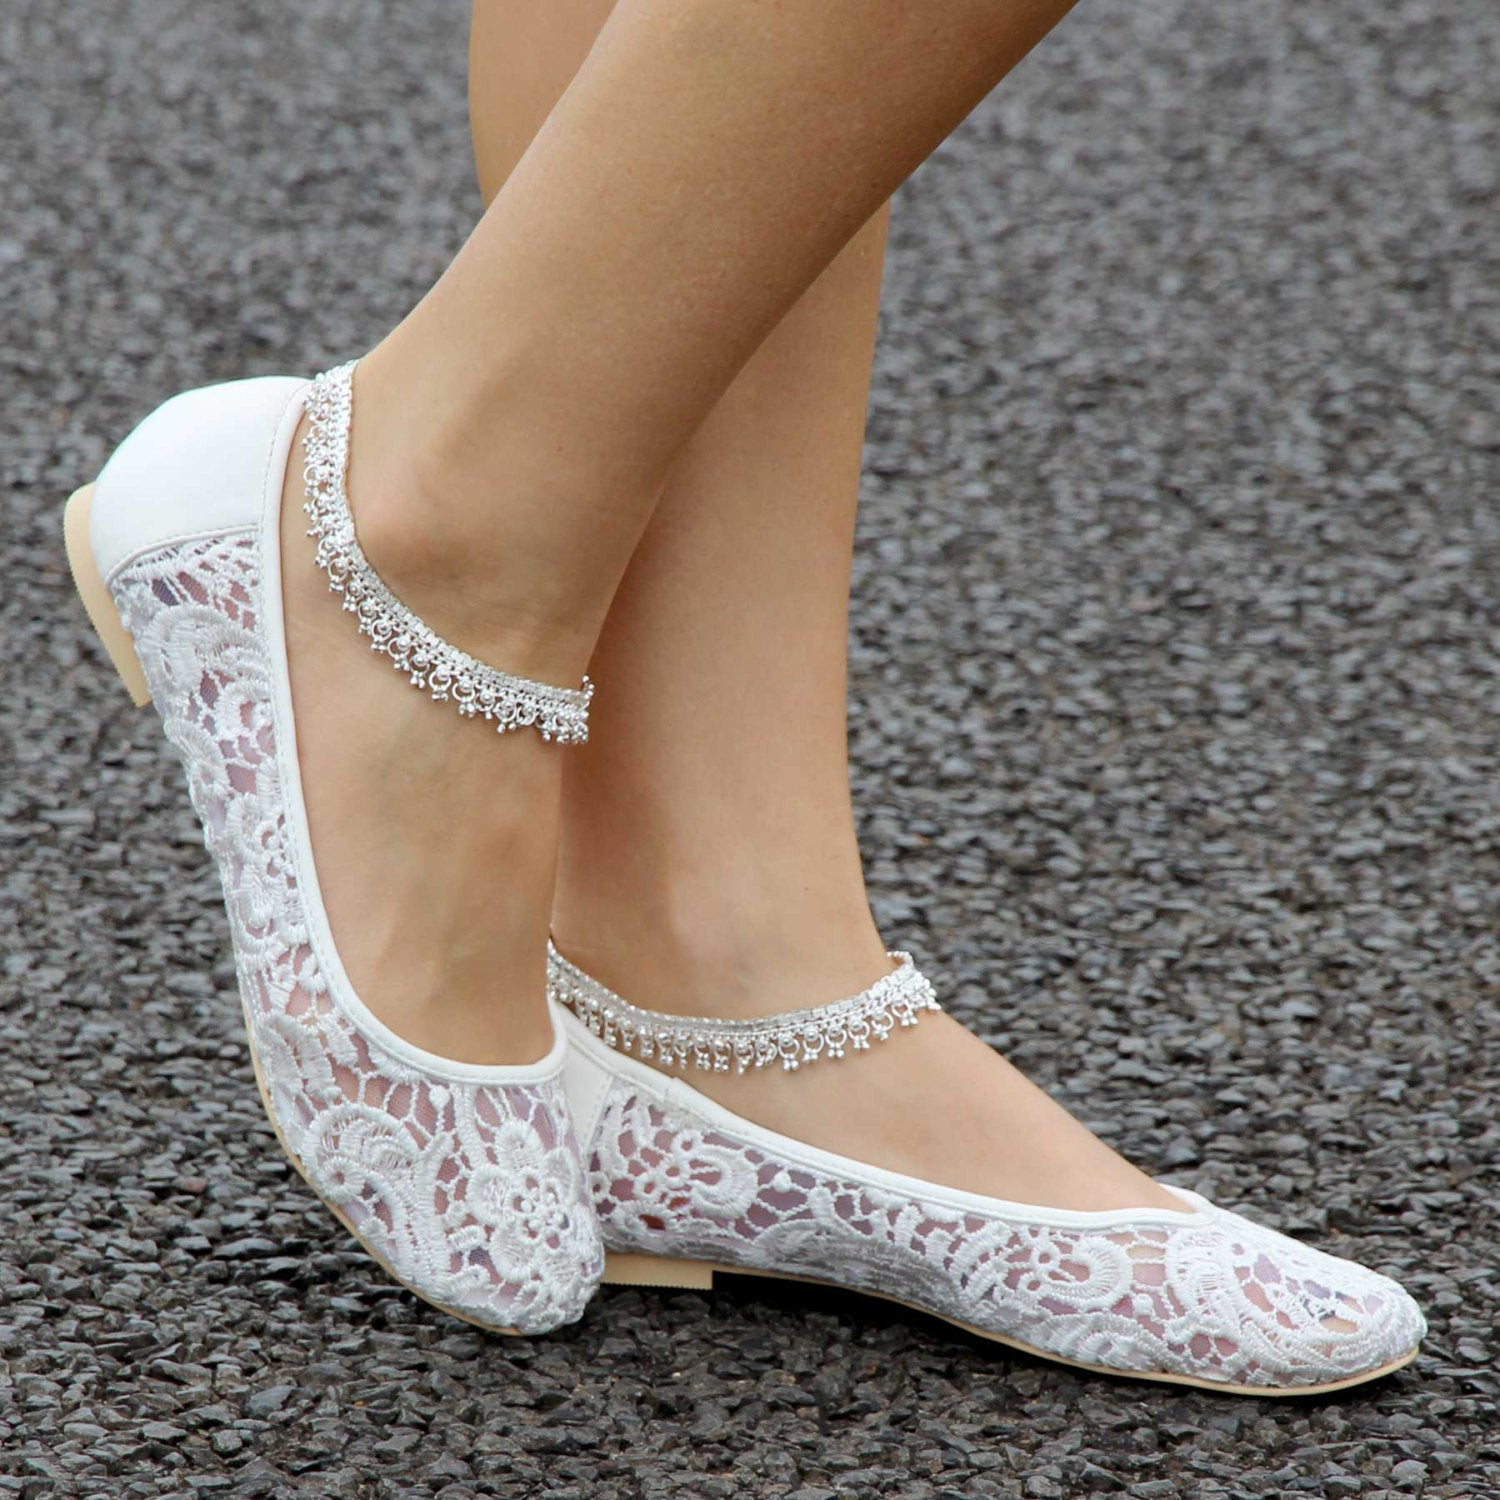 Wedding Shoes Ballet Flats
 Unavailable Listing on Etsy